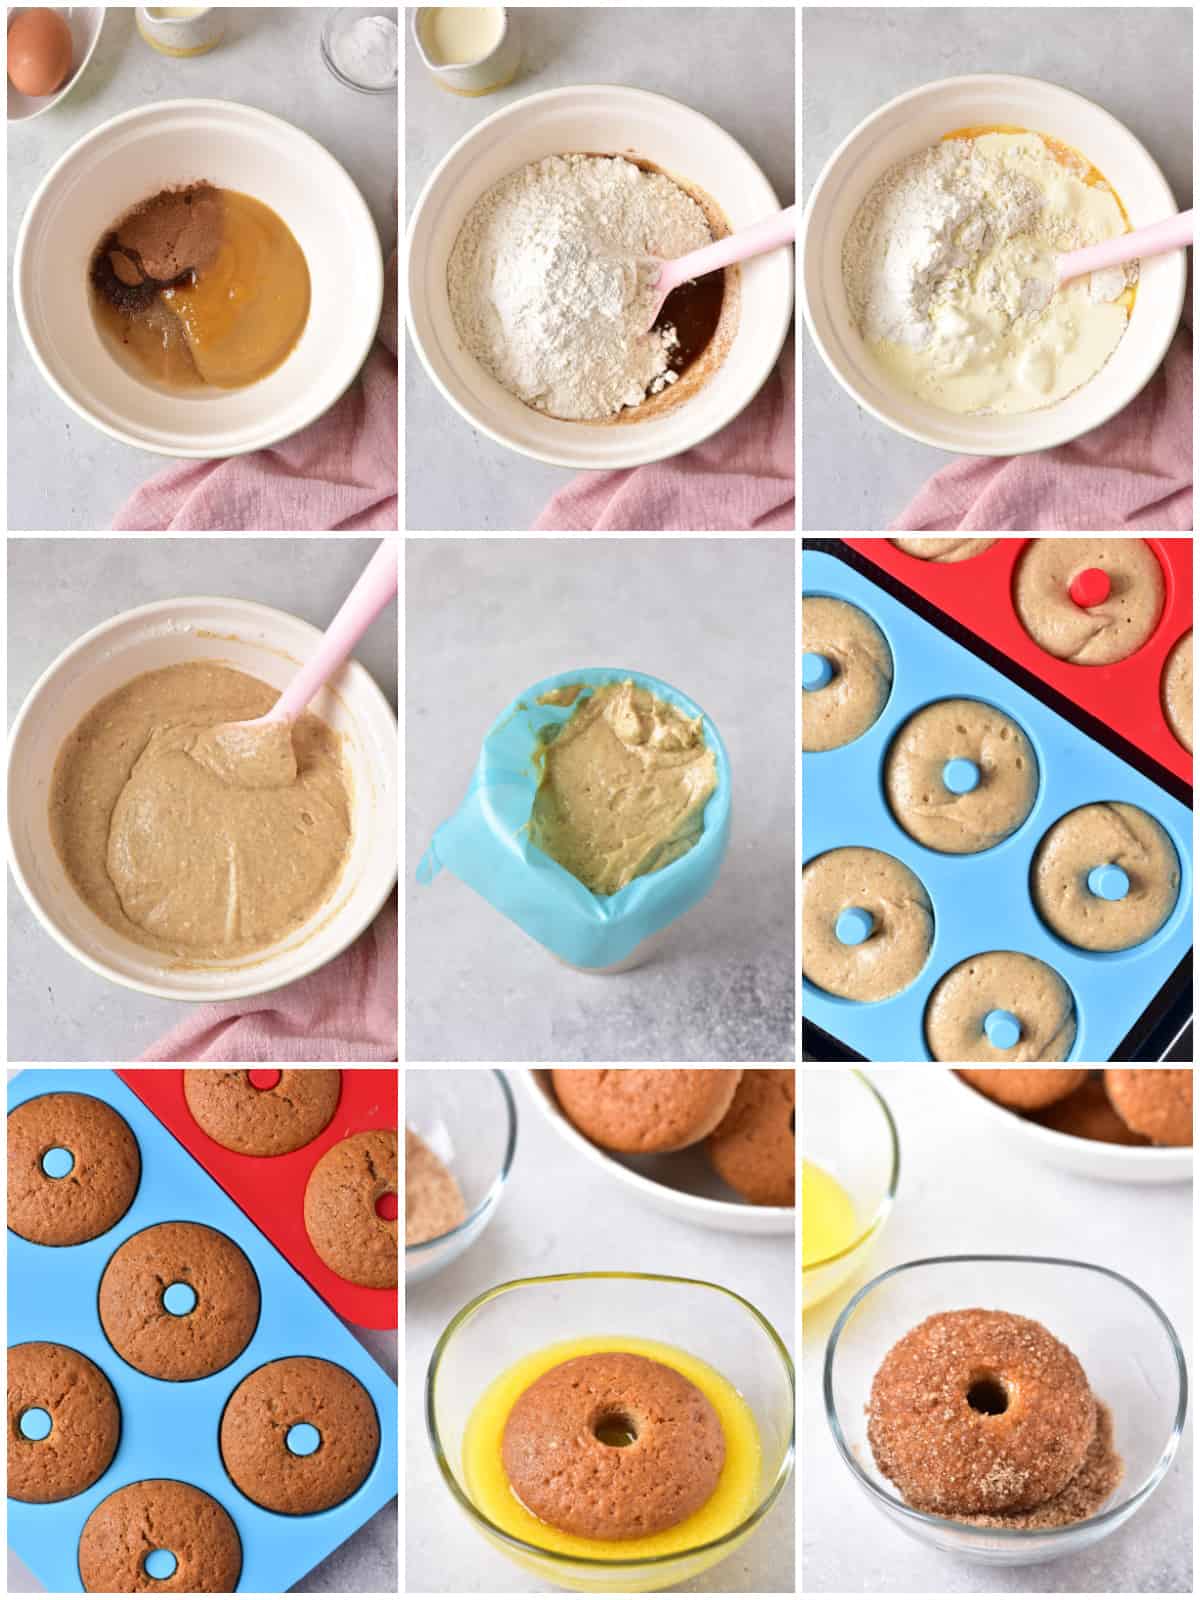 Step by step photos on how to make Baking Cinnamon Apple Donuts.